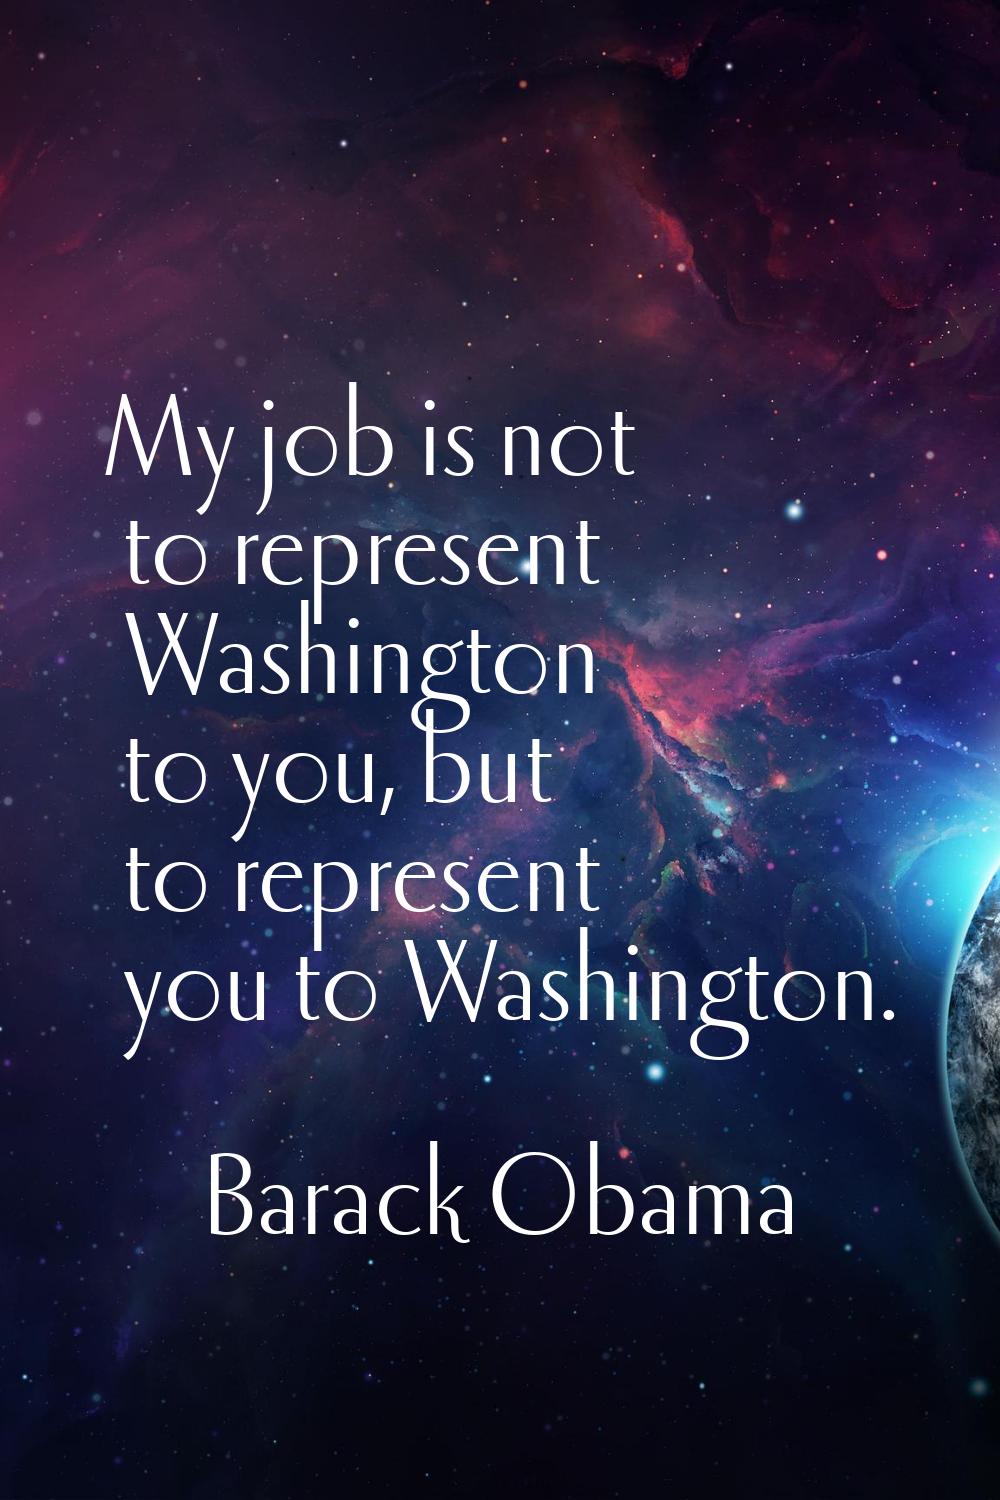 My job is not to represent Washington to you, but to represent you to Washington.